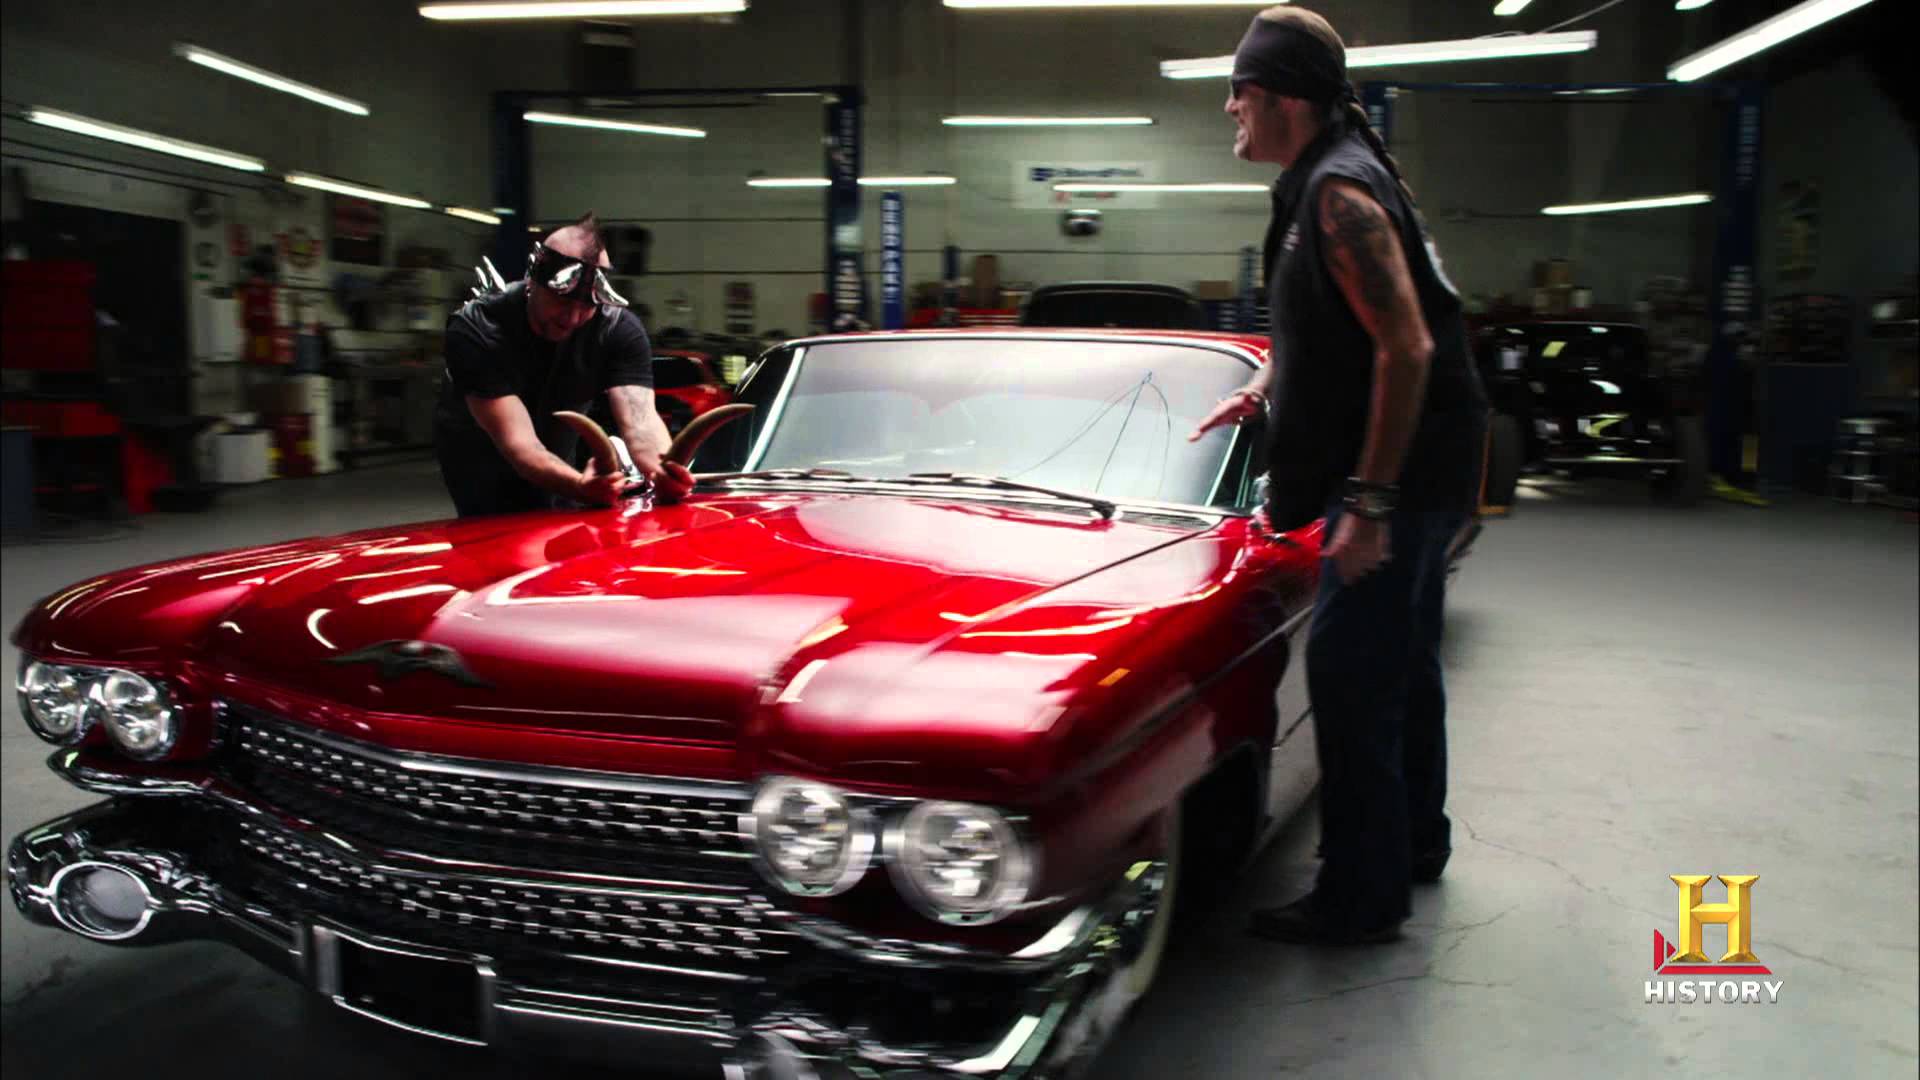 1920x1080 > Counting Cars Wallpapers